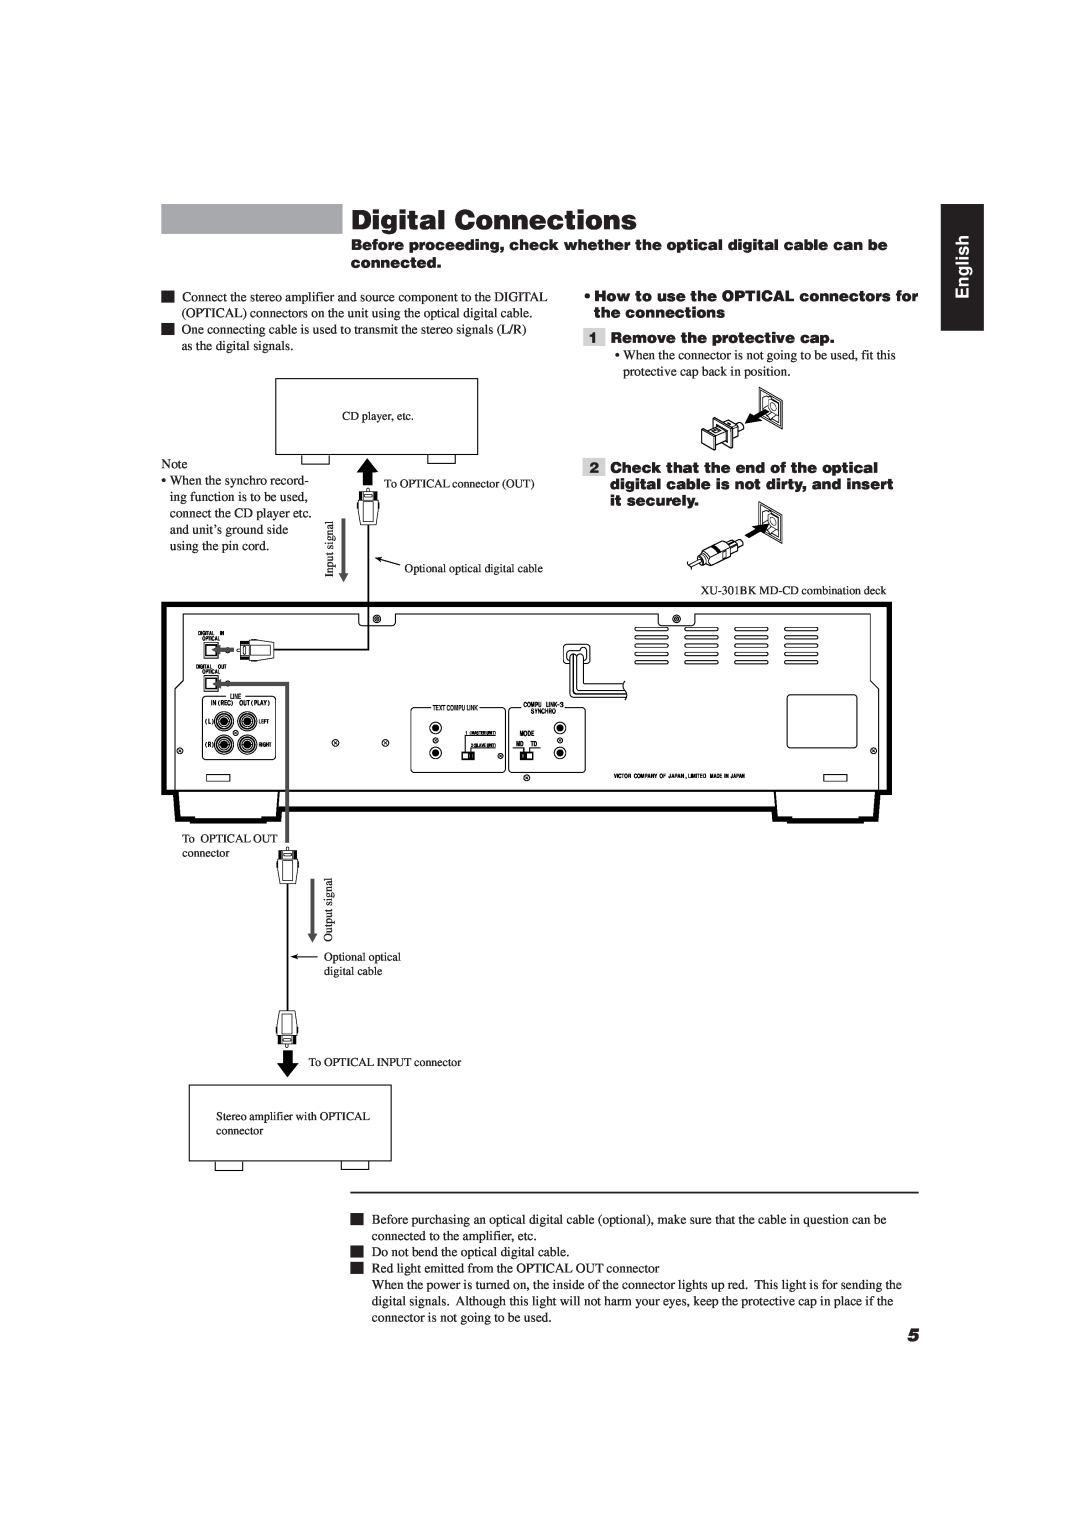 JVC XU-301BK manual Digital Connections, English, How to use the OPTICAL connectors for, the connections, it securely 